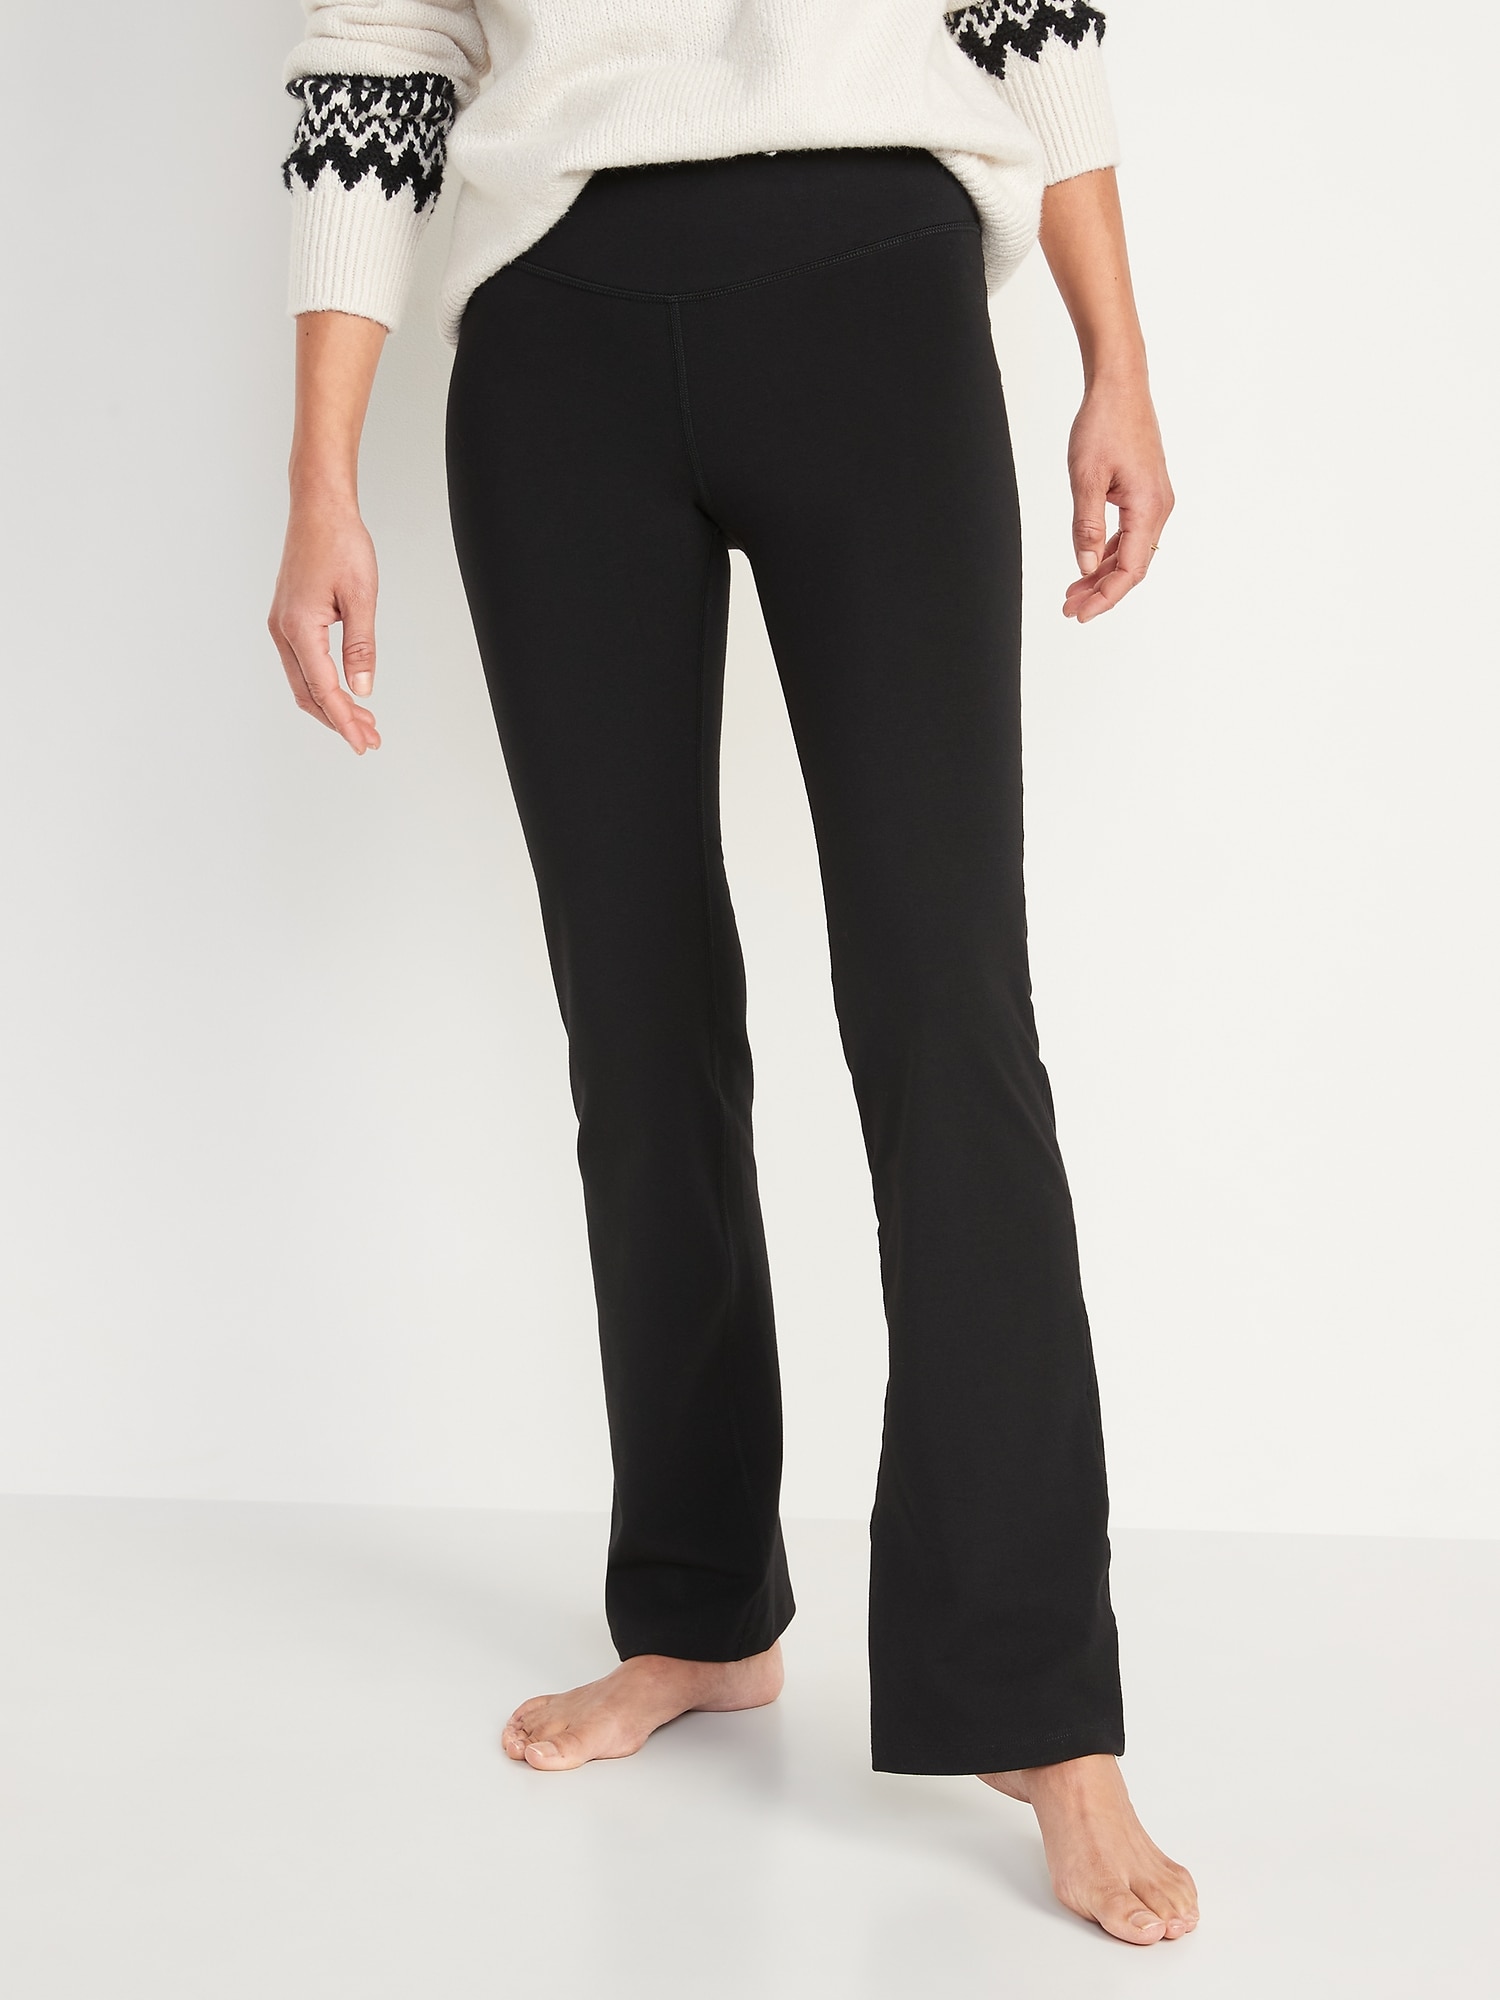 Extra High-Waisted PowerChill Slim Boot-Cut Pants for Women, Old Navy